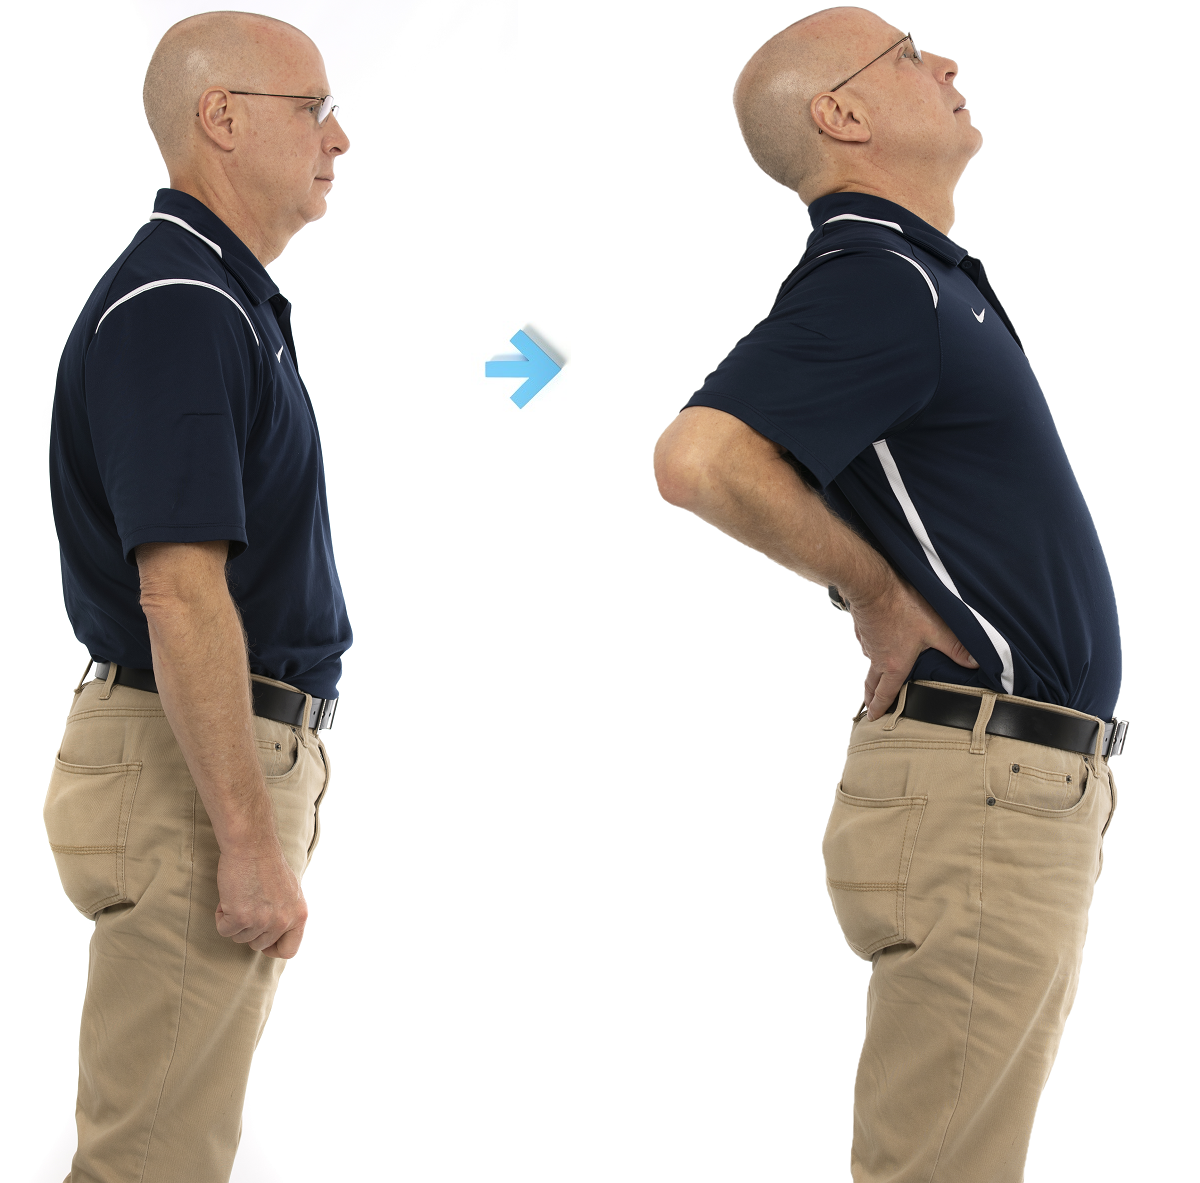 Cut-out images of Dean Plafcan stretching his back